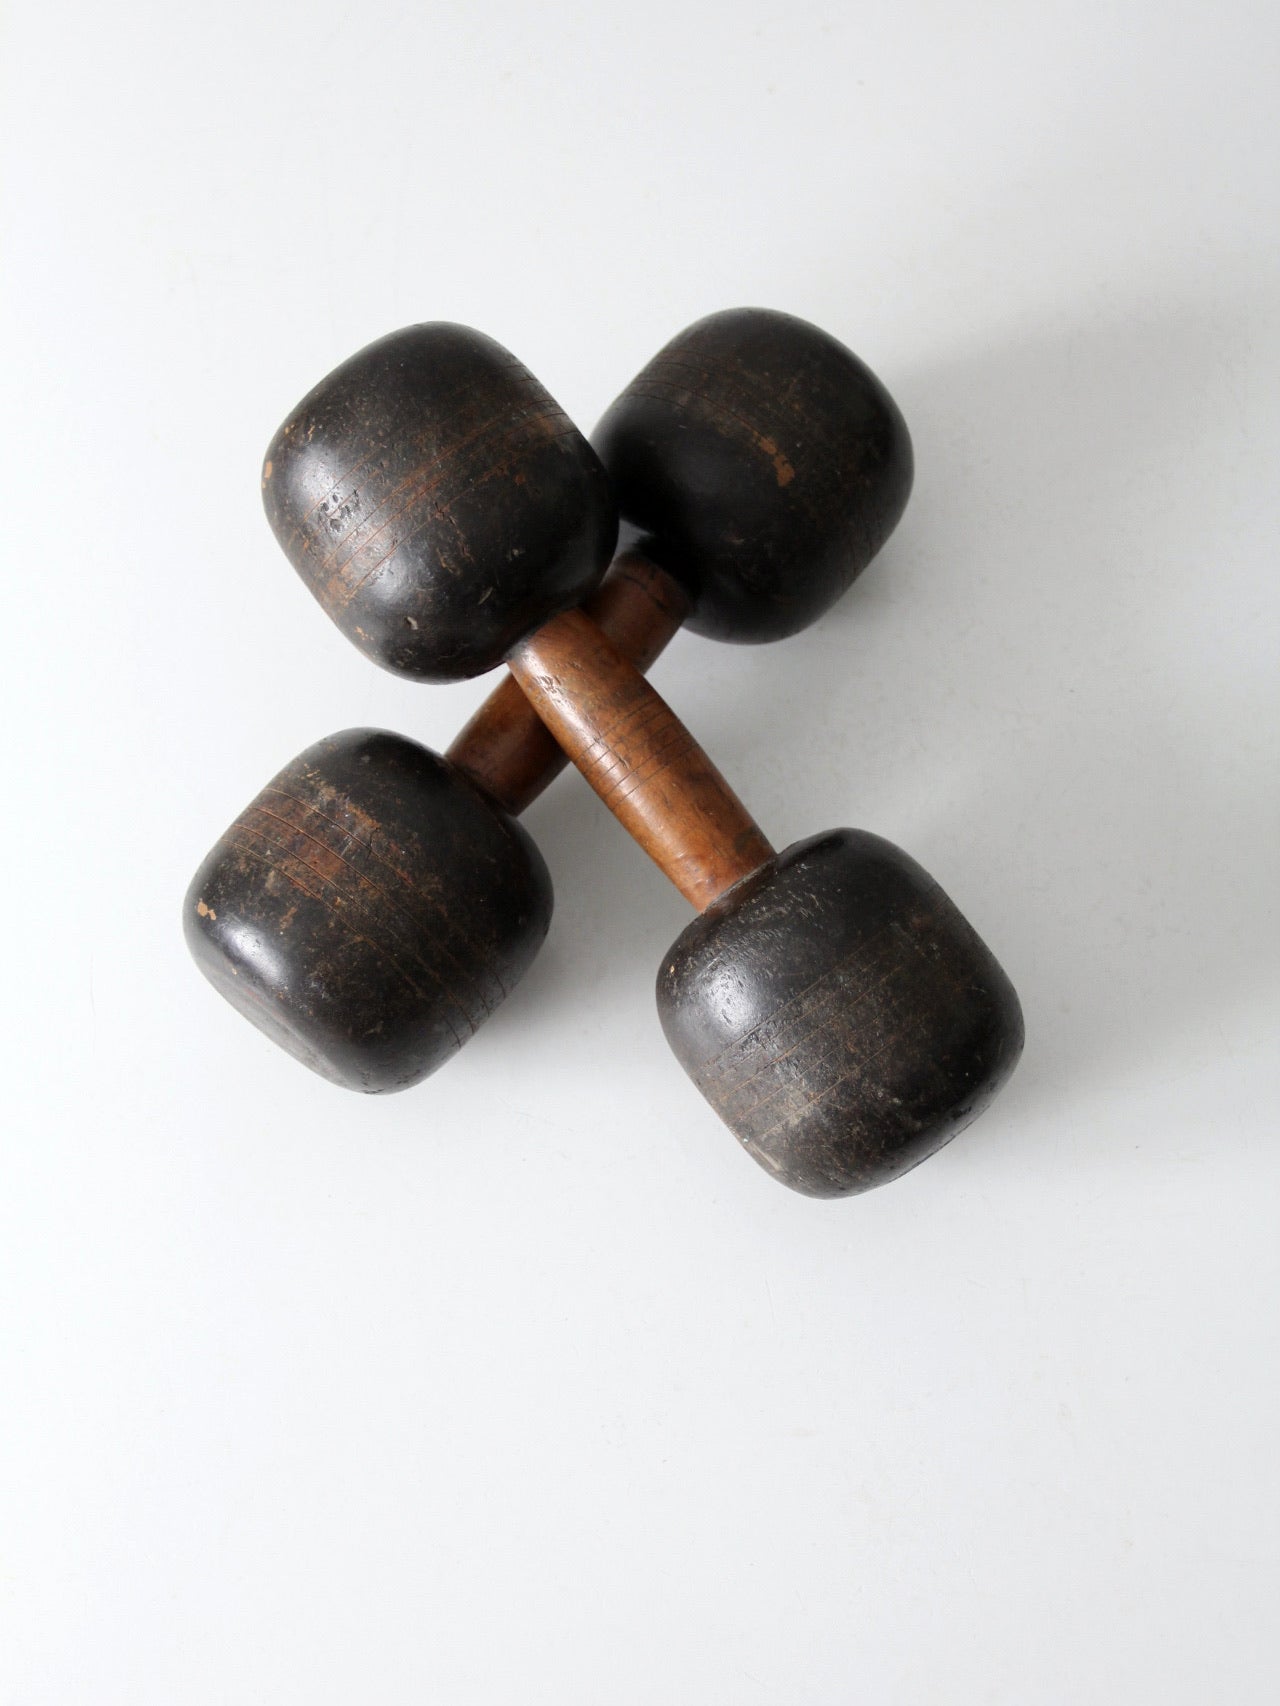 Authentic York Dumbbells 65 Pounds at 1stDibs